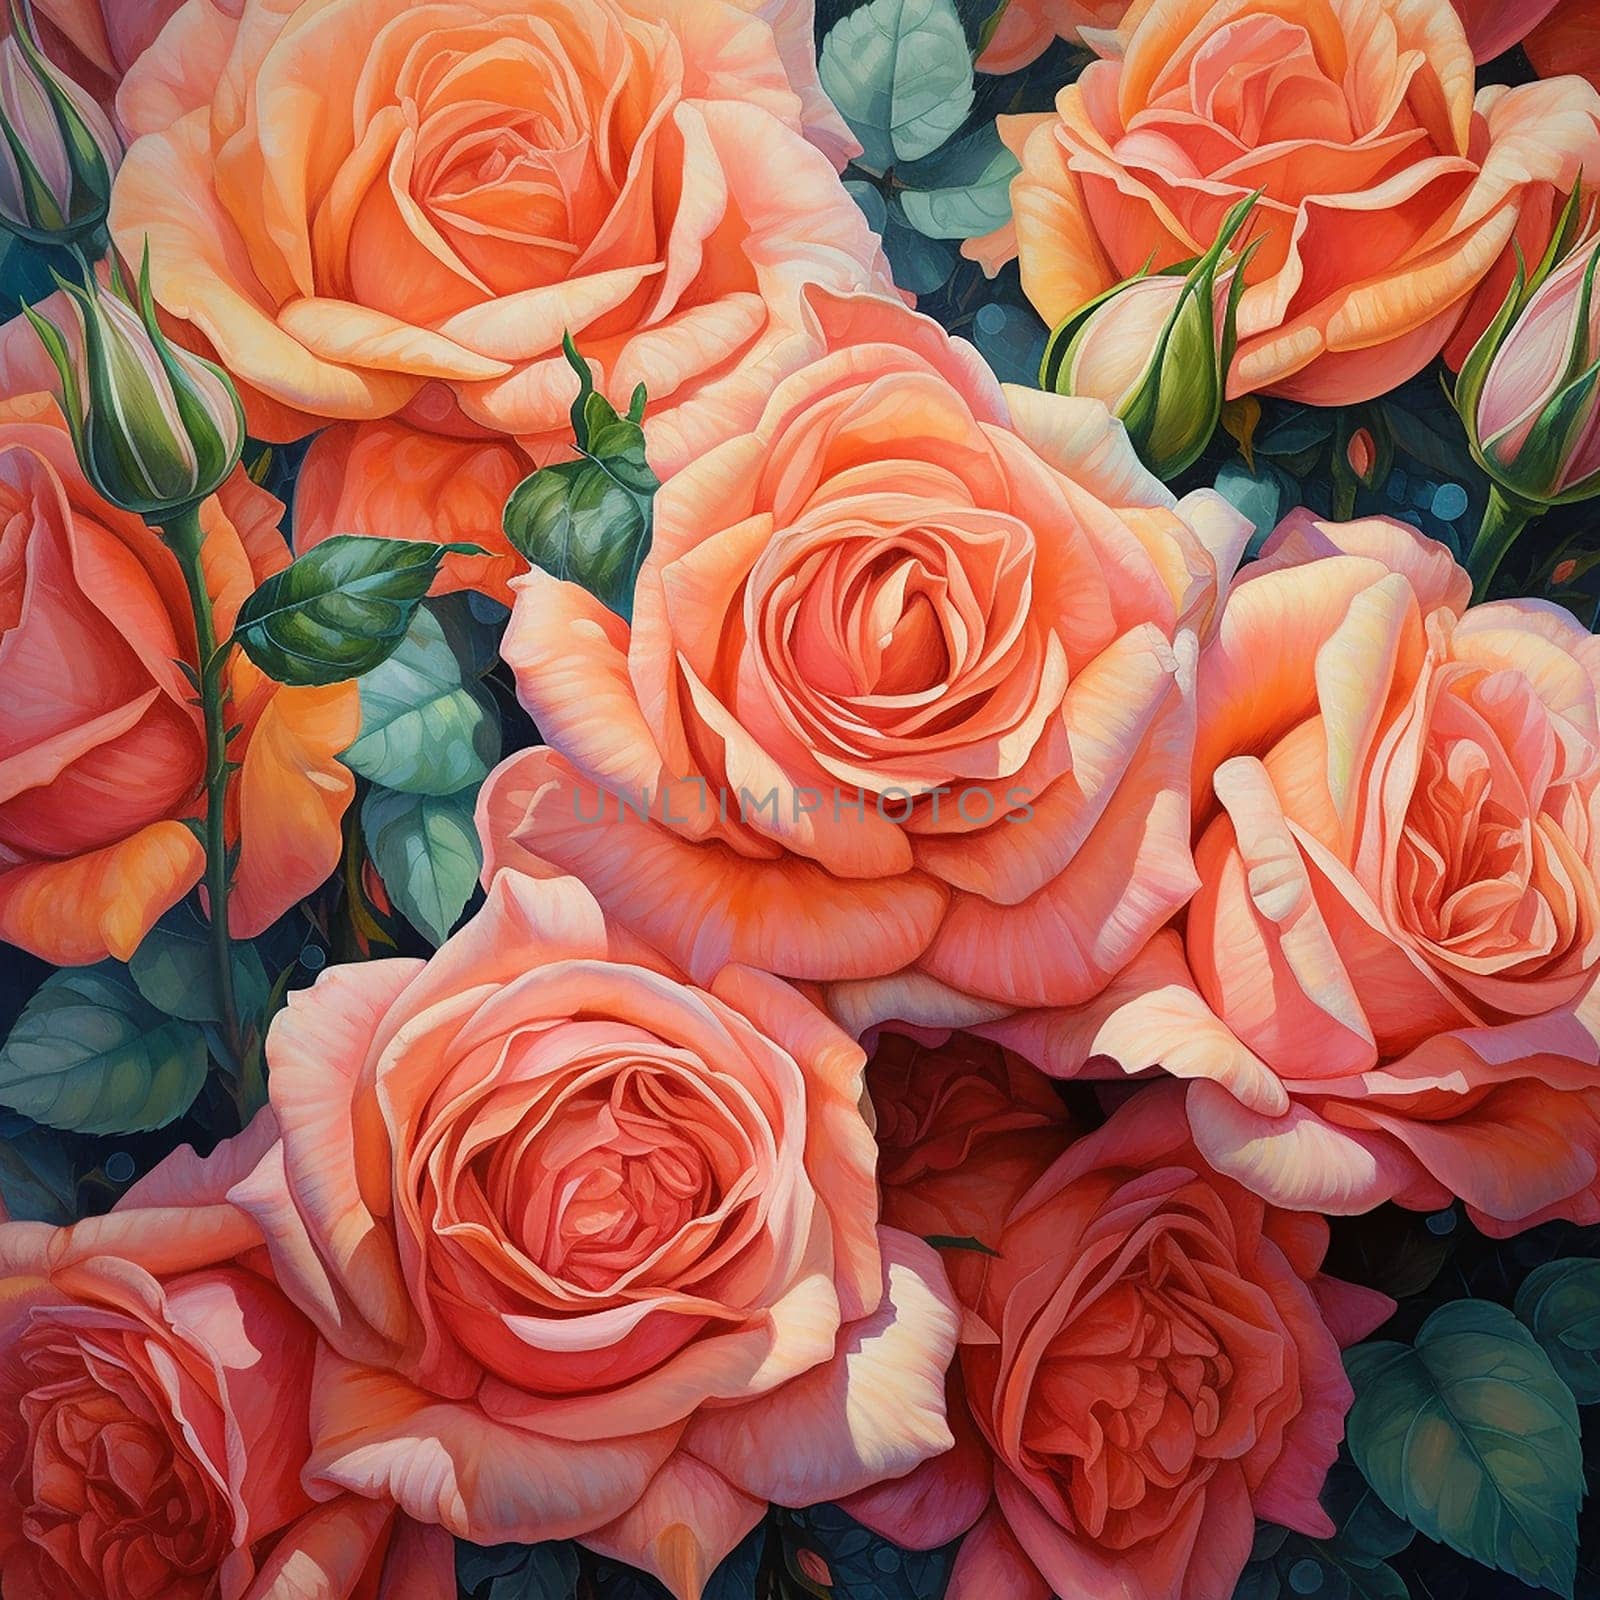 Close up of vibrant peach colored roses in a lush arrangement. by Hype2art